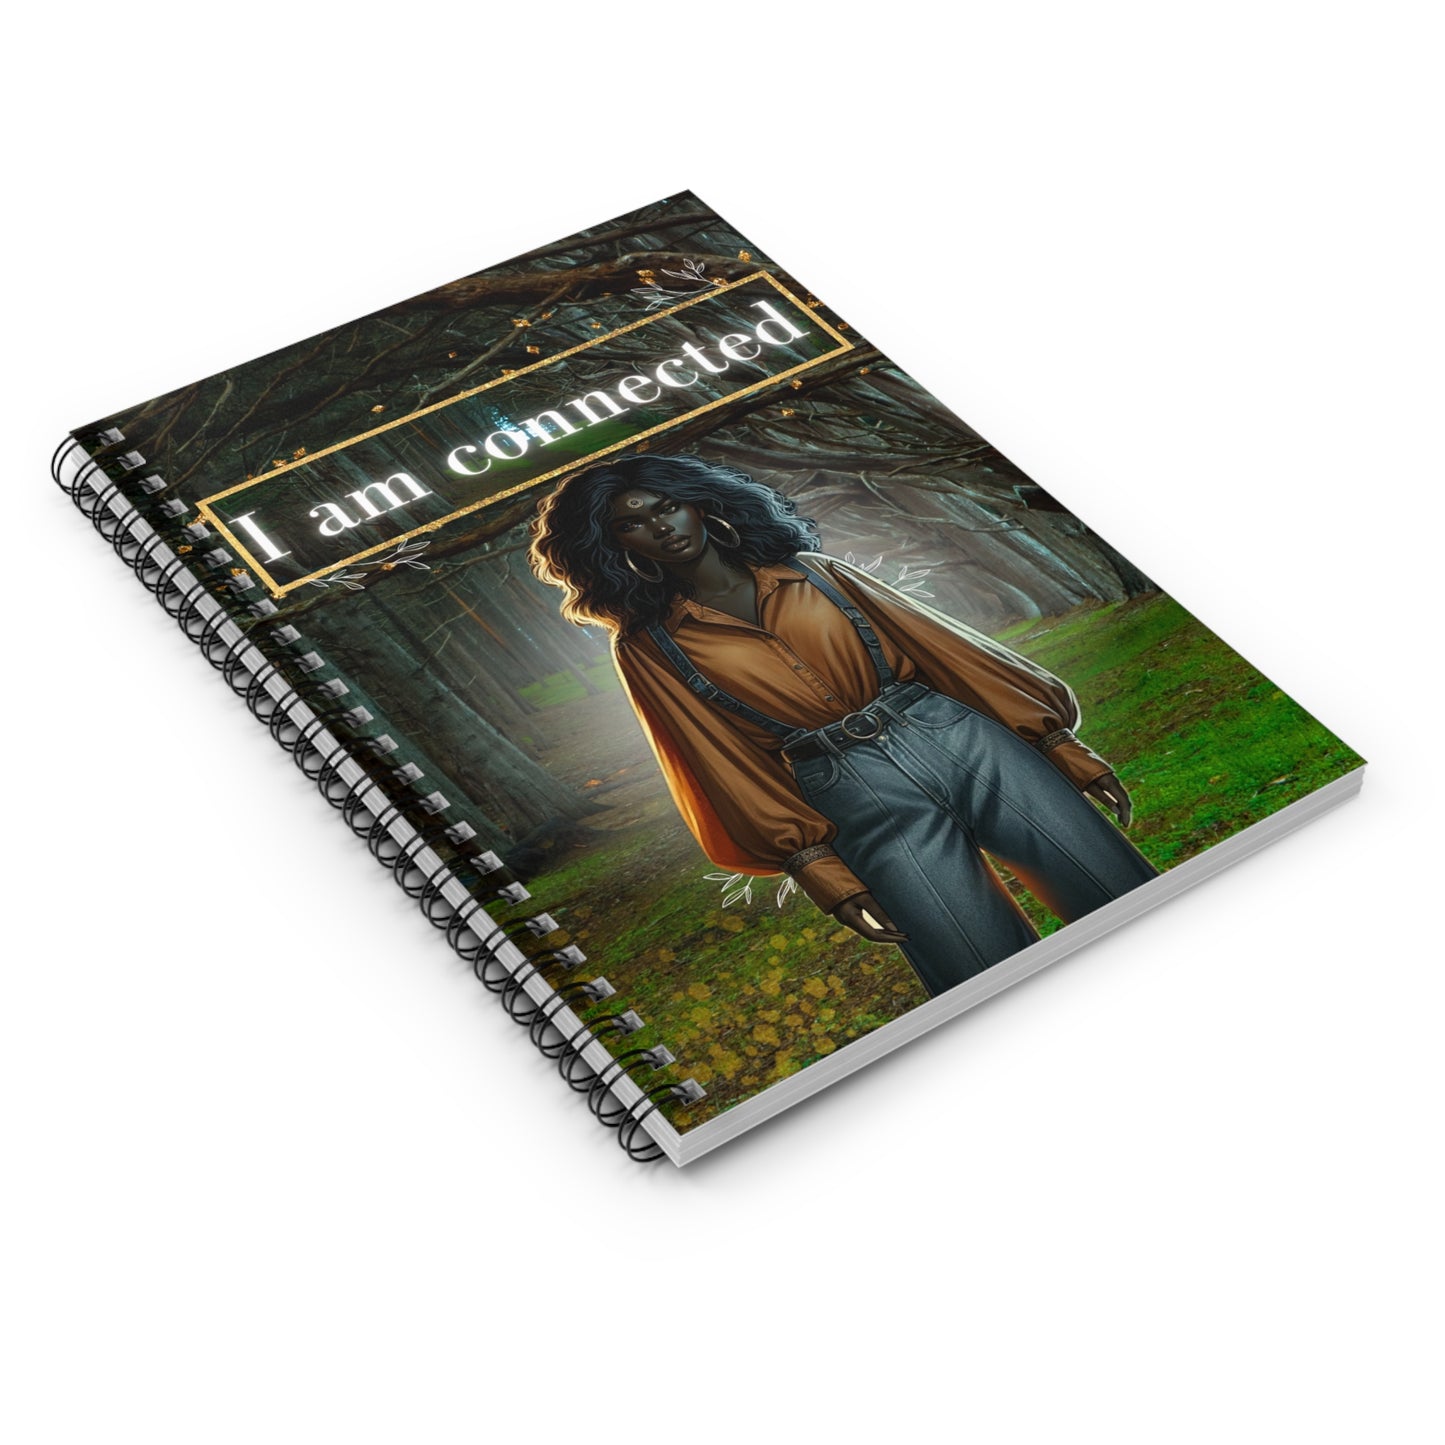 I AM CONNECTED: Affirmation Journal